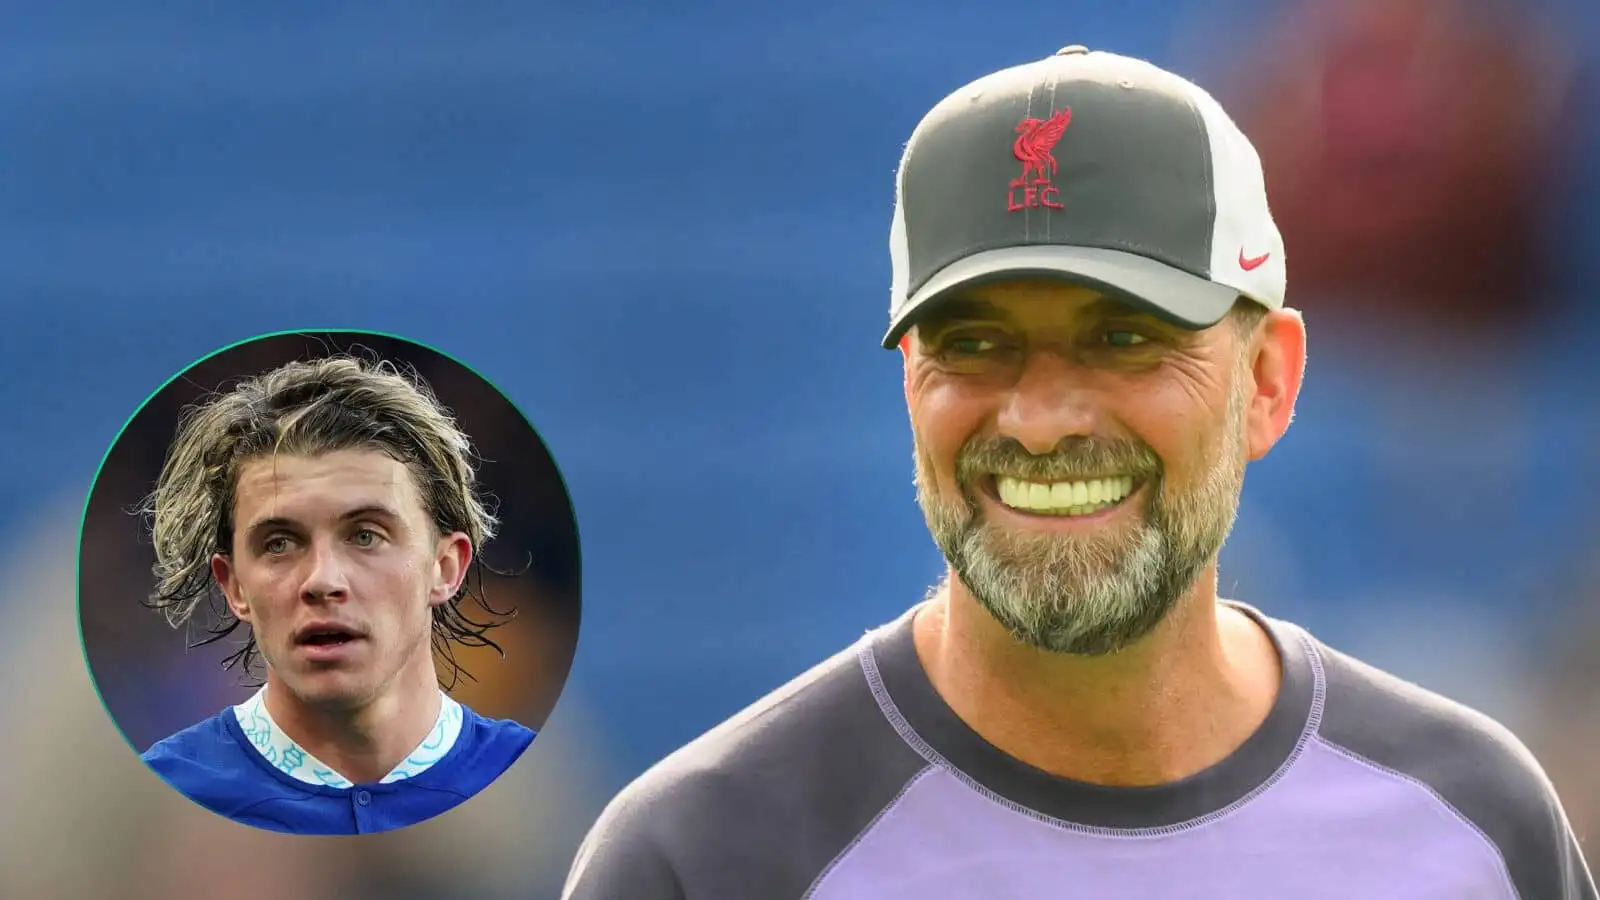 Chelsea star Conor Gallagher is a target for Liverpool